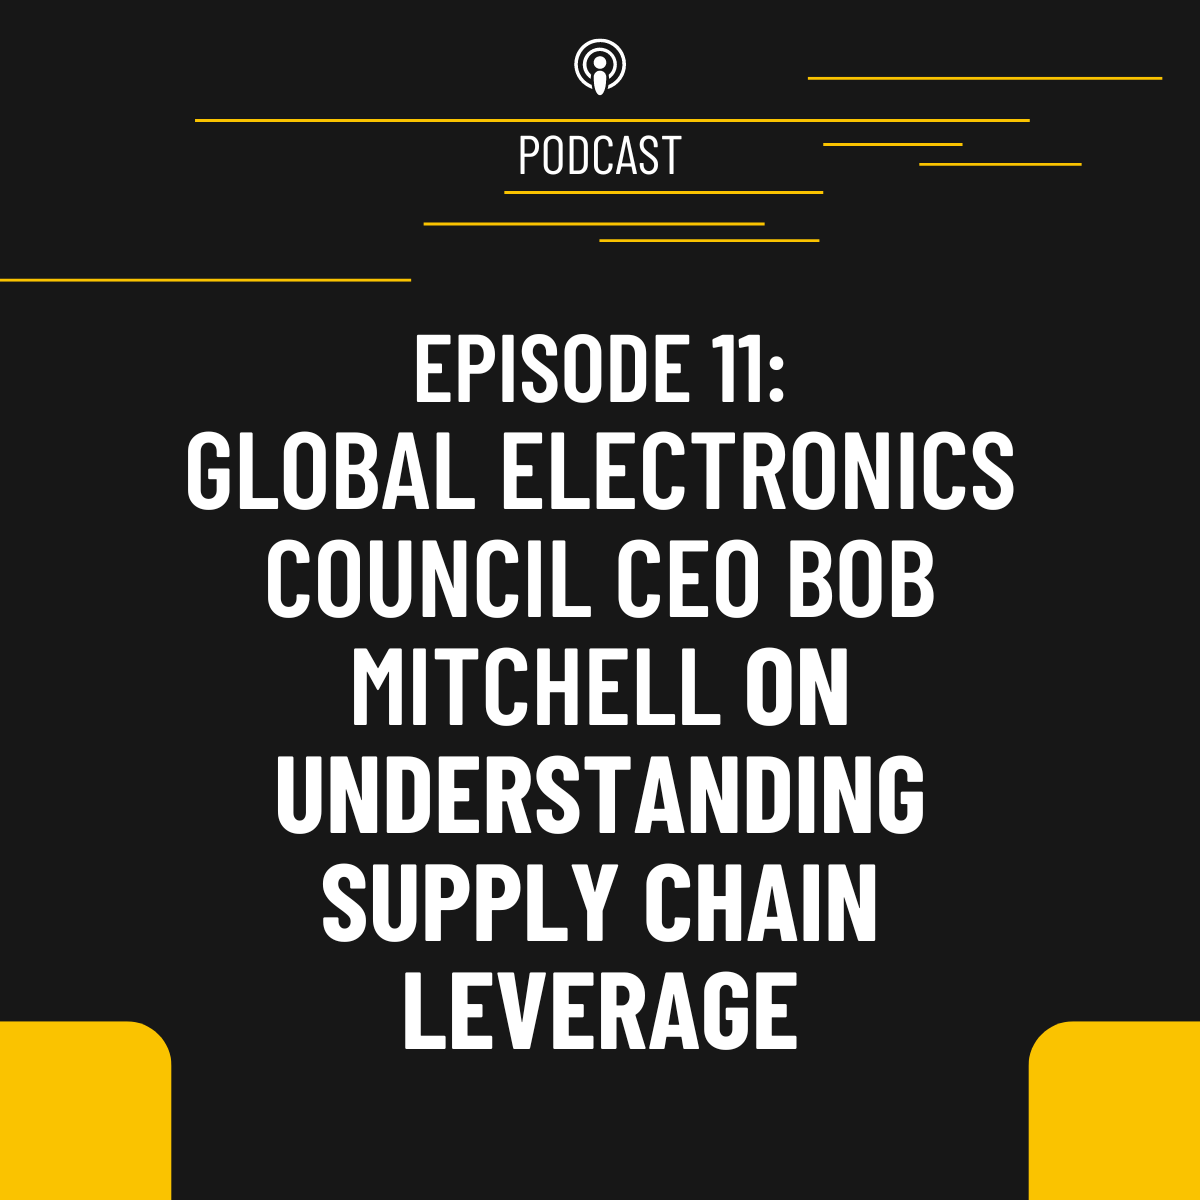 Episode 11: Global Electronics Council CEO Bob Mitchell on understanding supply chain leverage and market-credible ecolabels